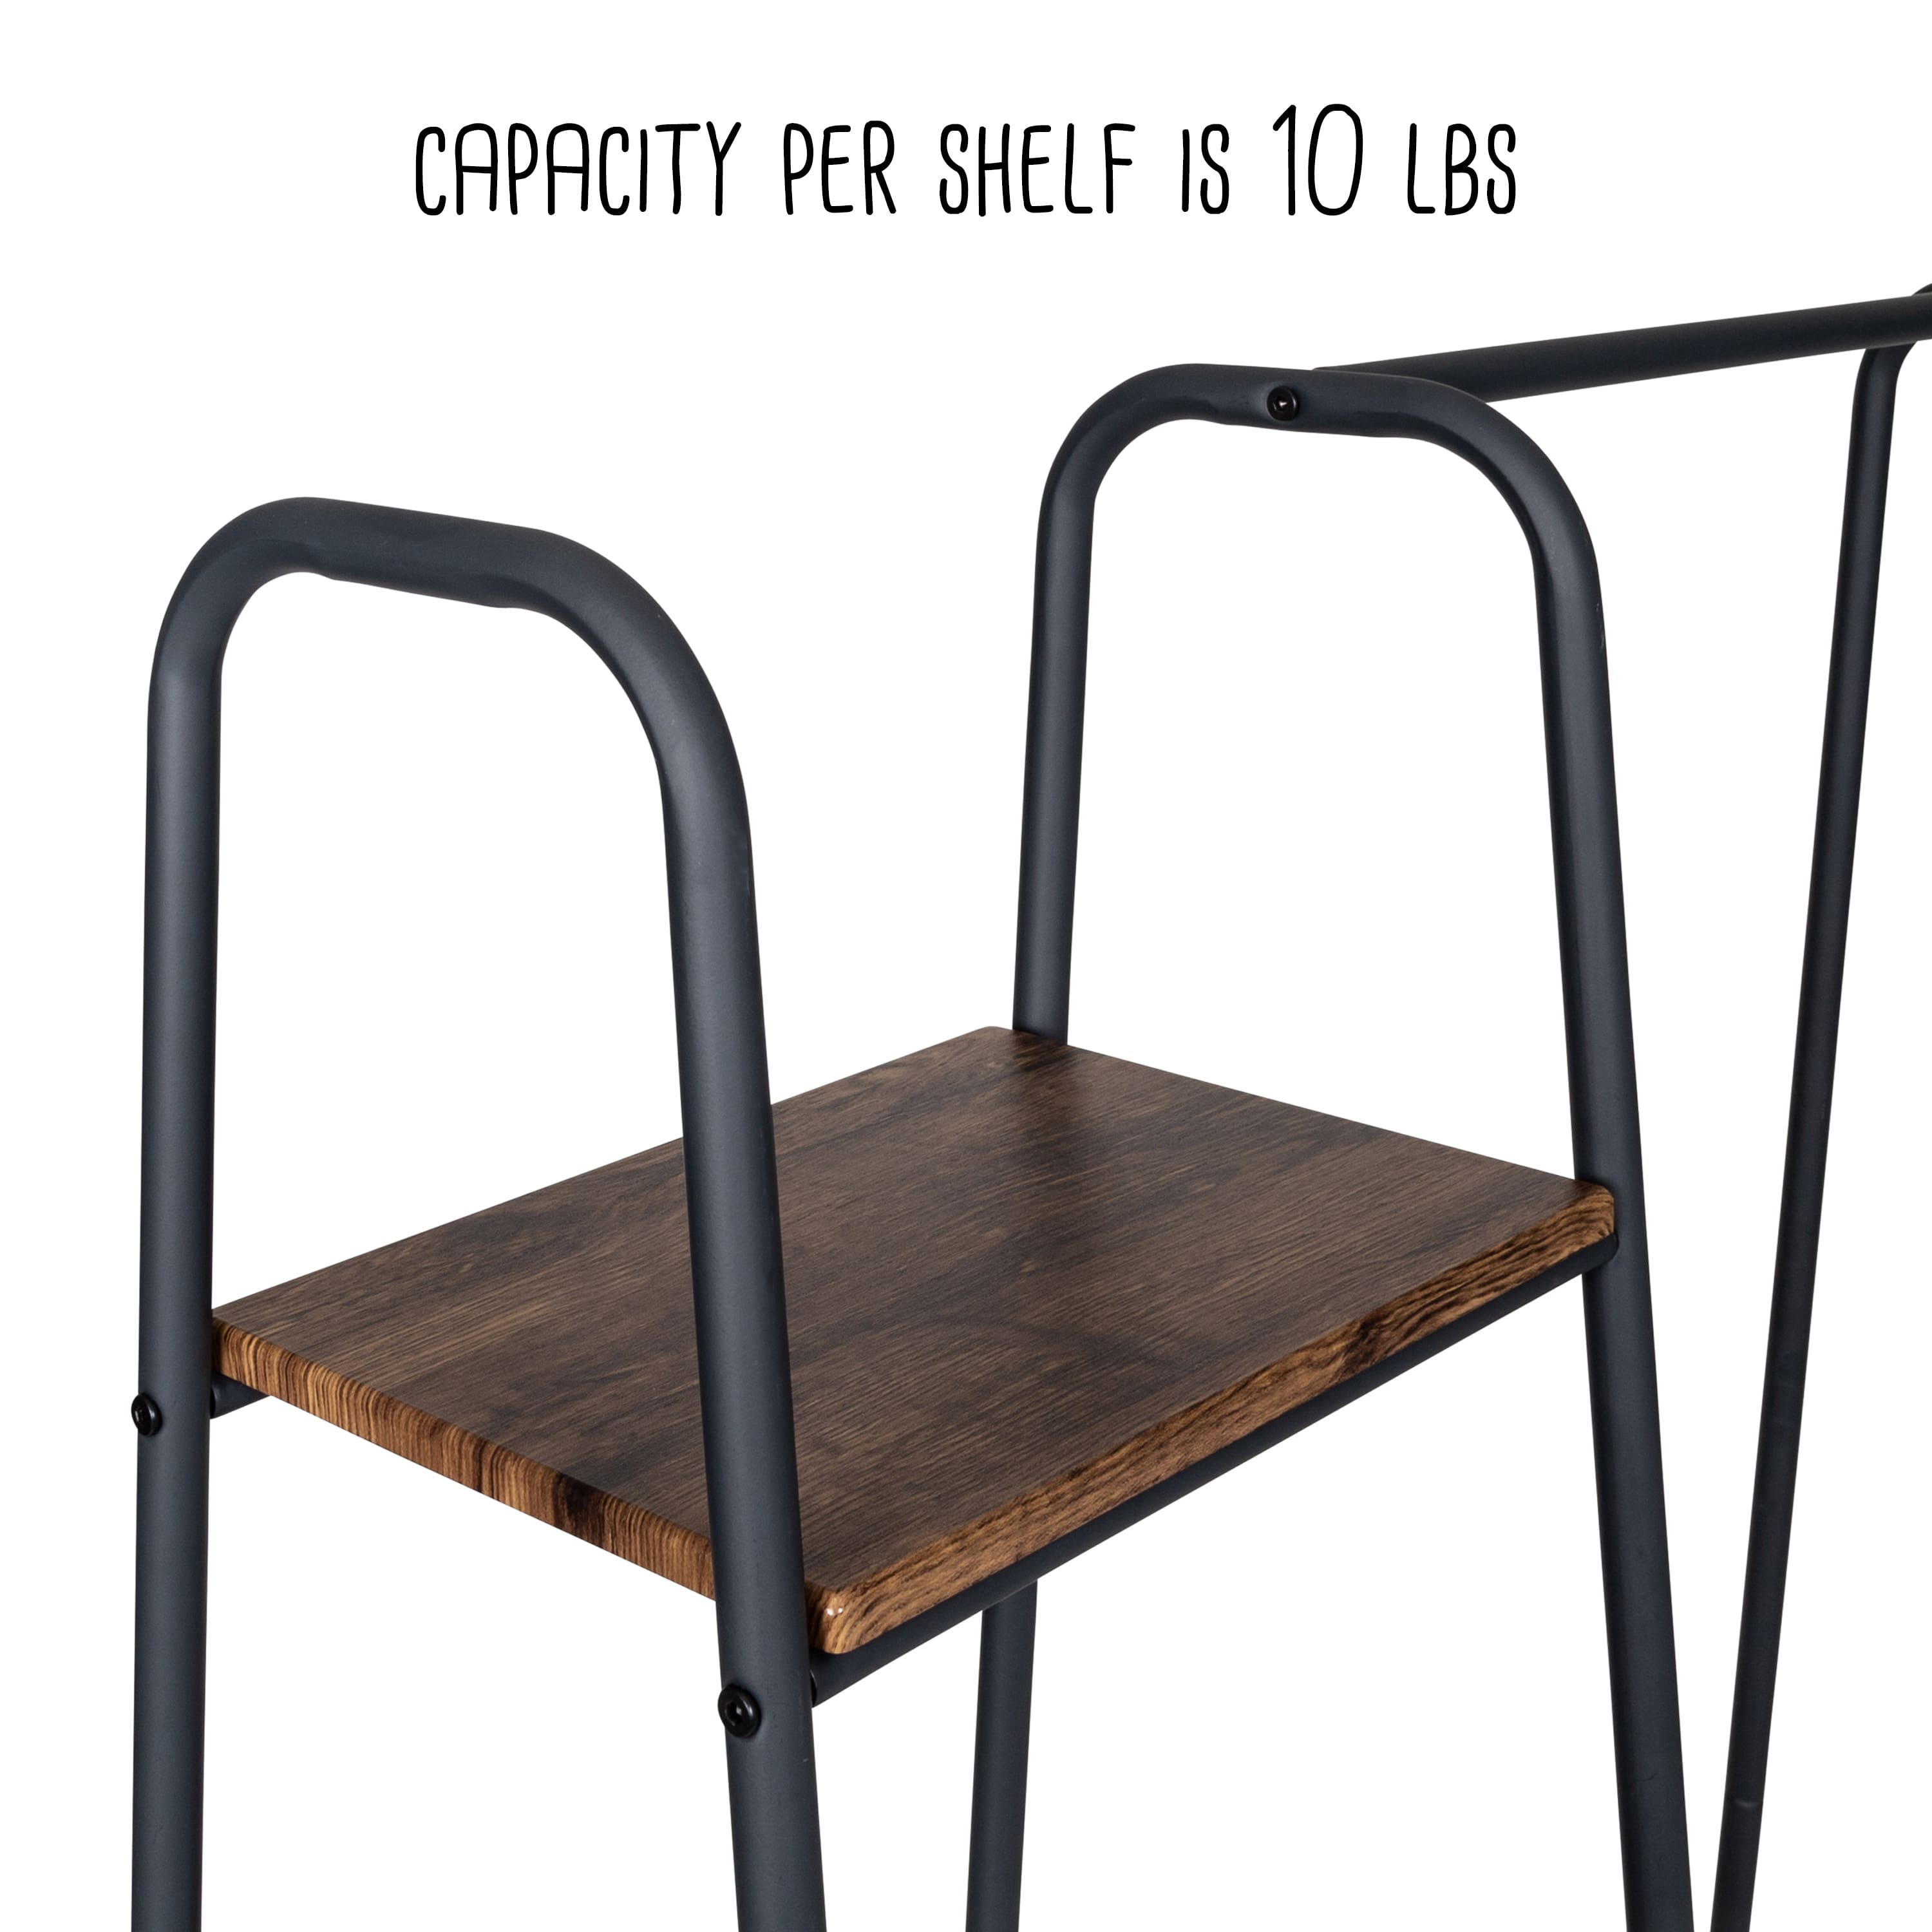 Honey Can Do Black/Natural Freestanding Metal Clothing Rack with Wood Shelves